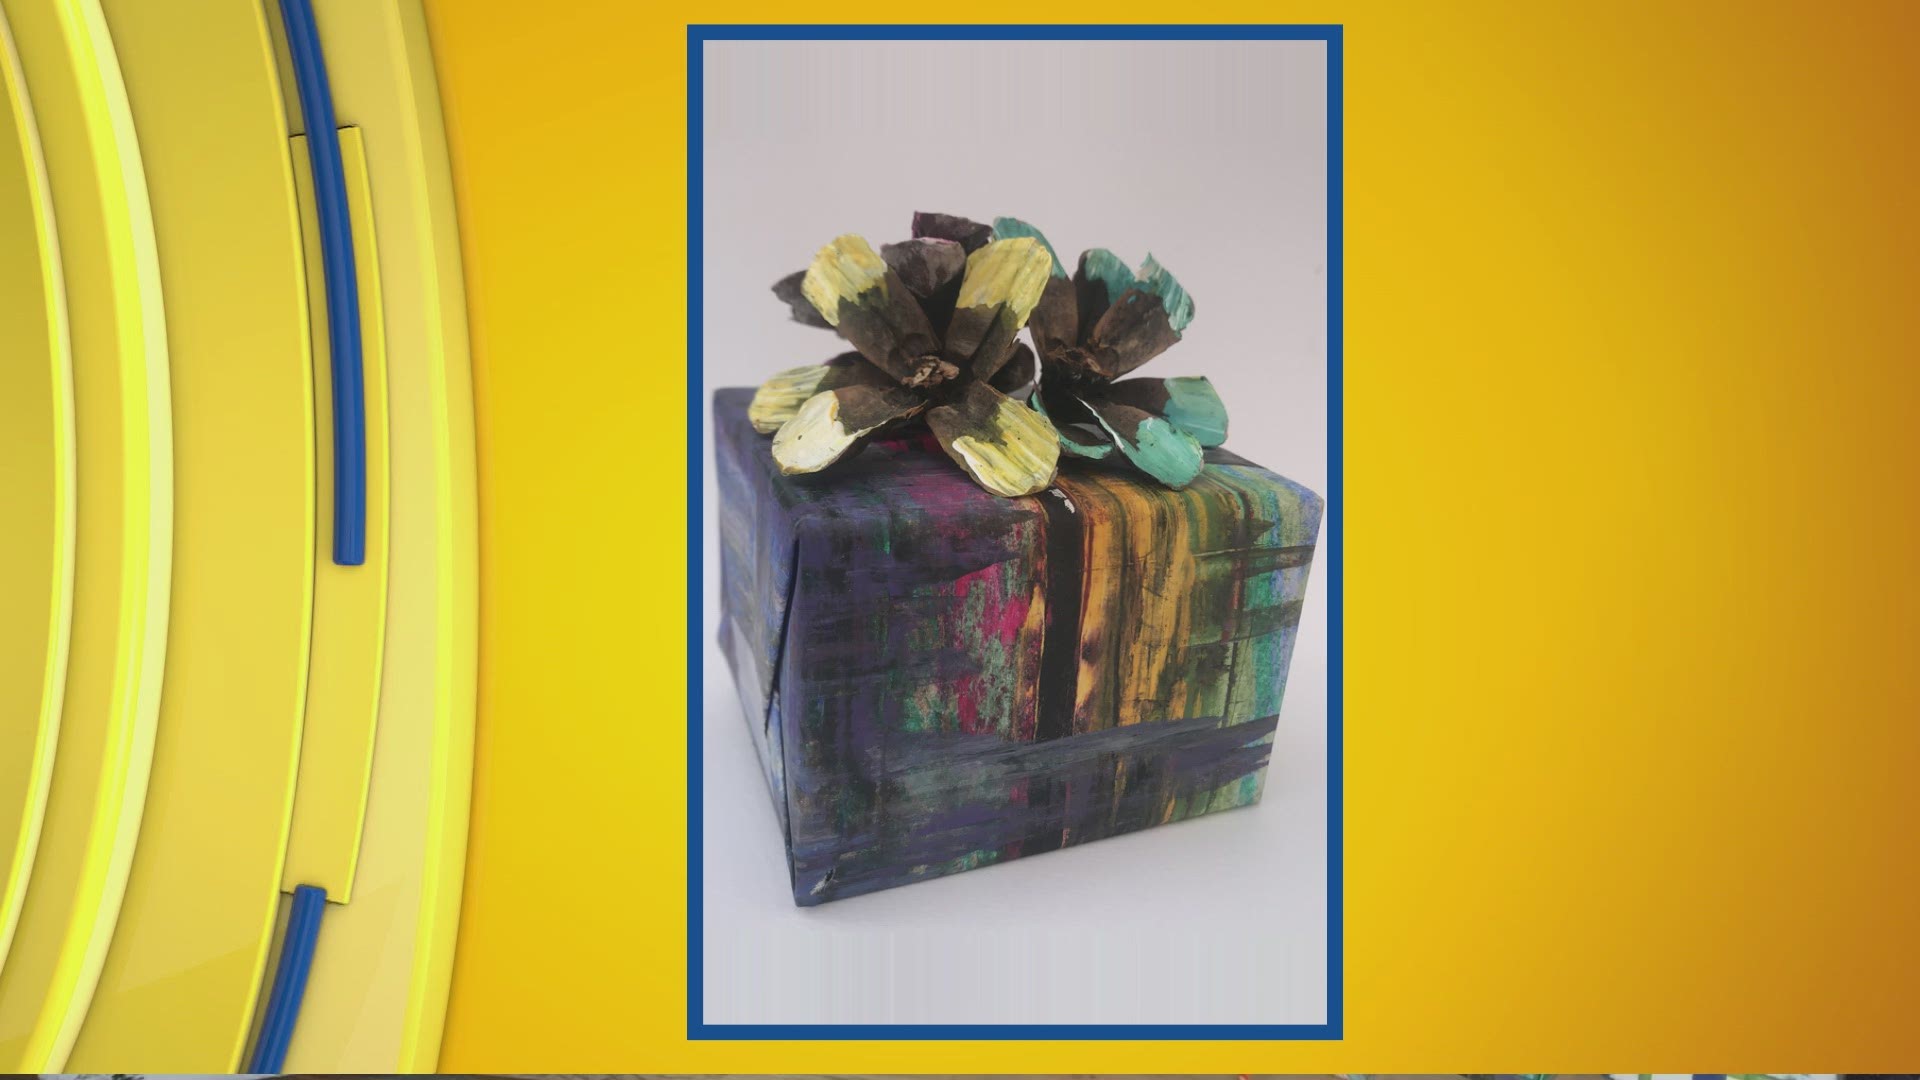 Michele wraps gifts this morning on 'Iowa Live'